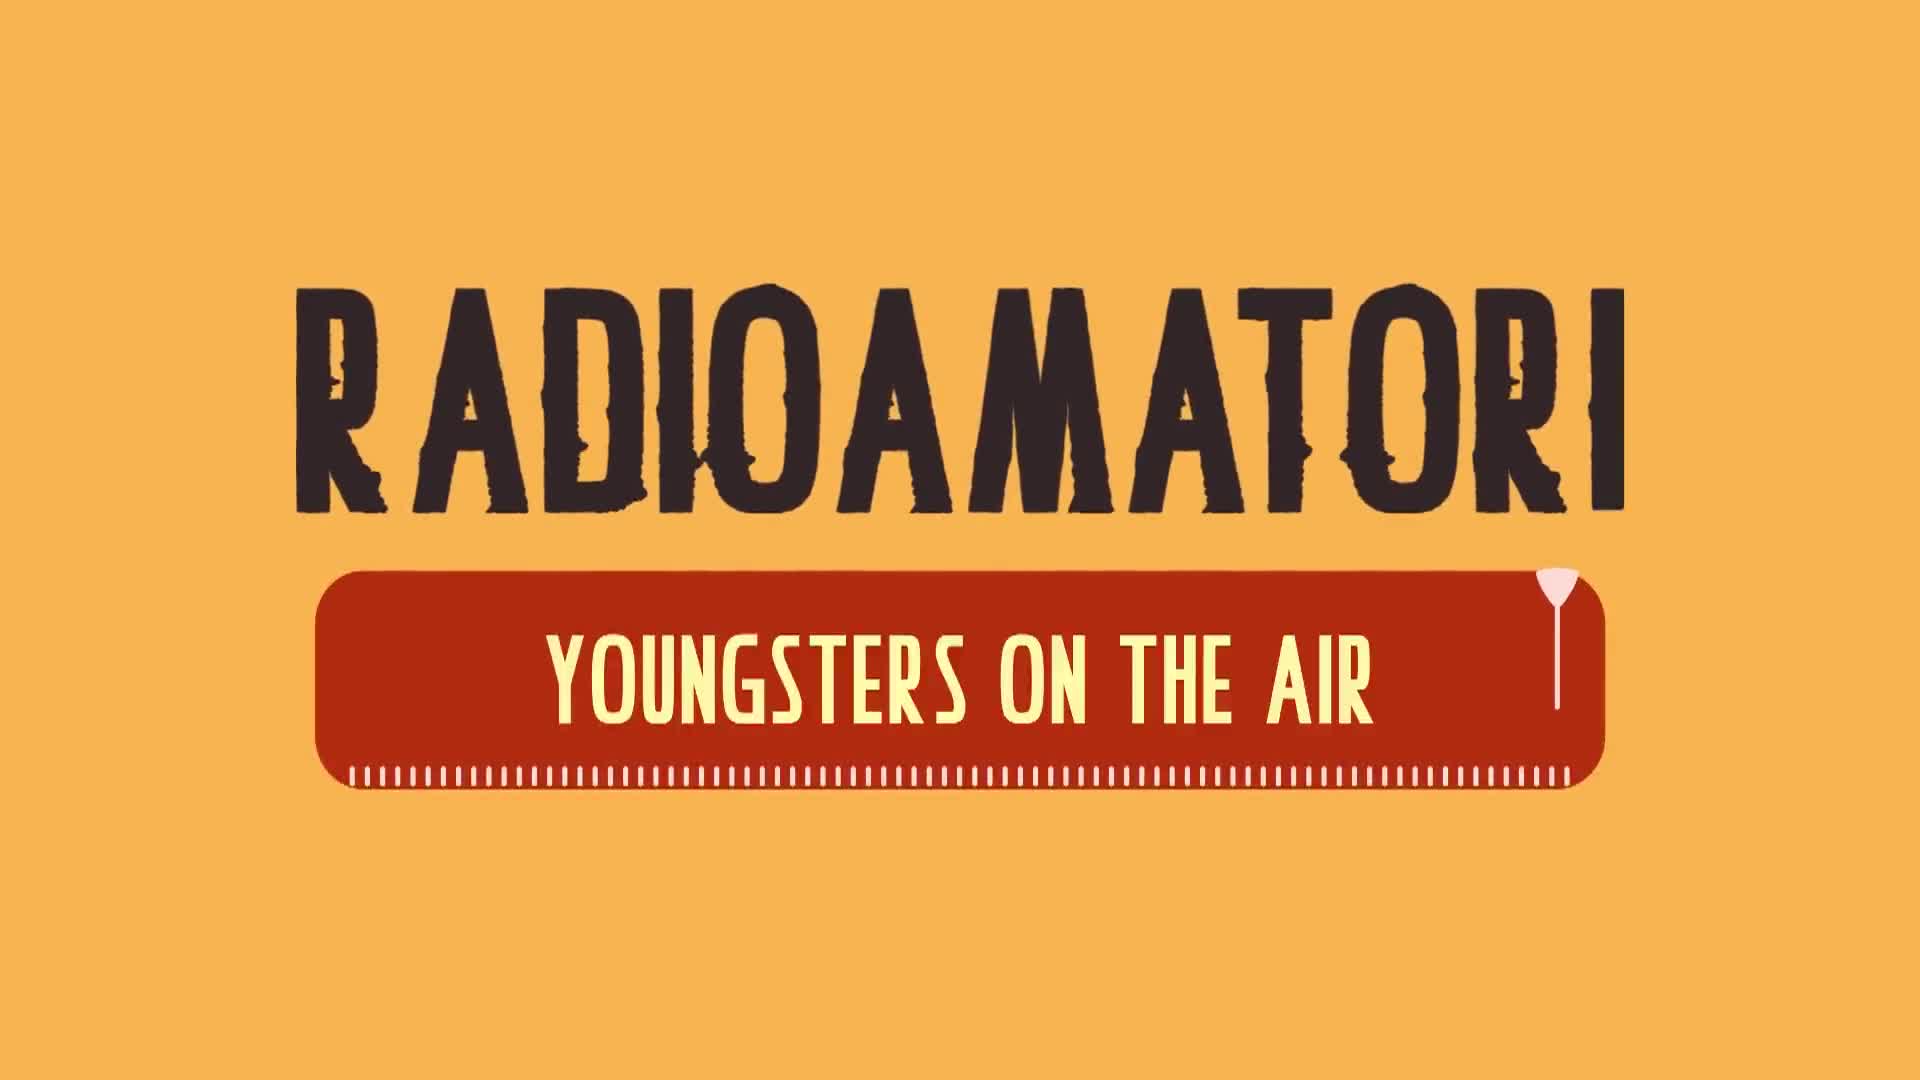 Radioamatori | Youngsters On The Air - immagine